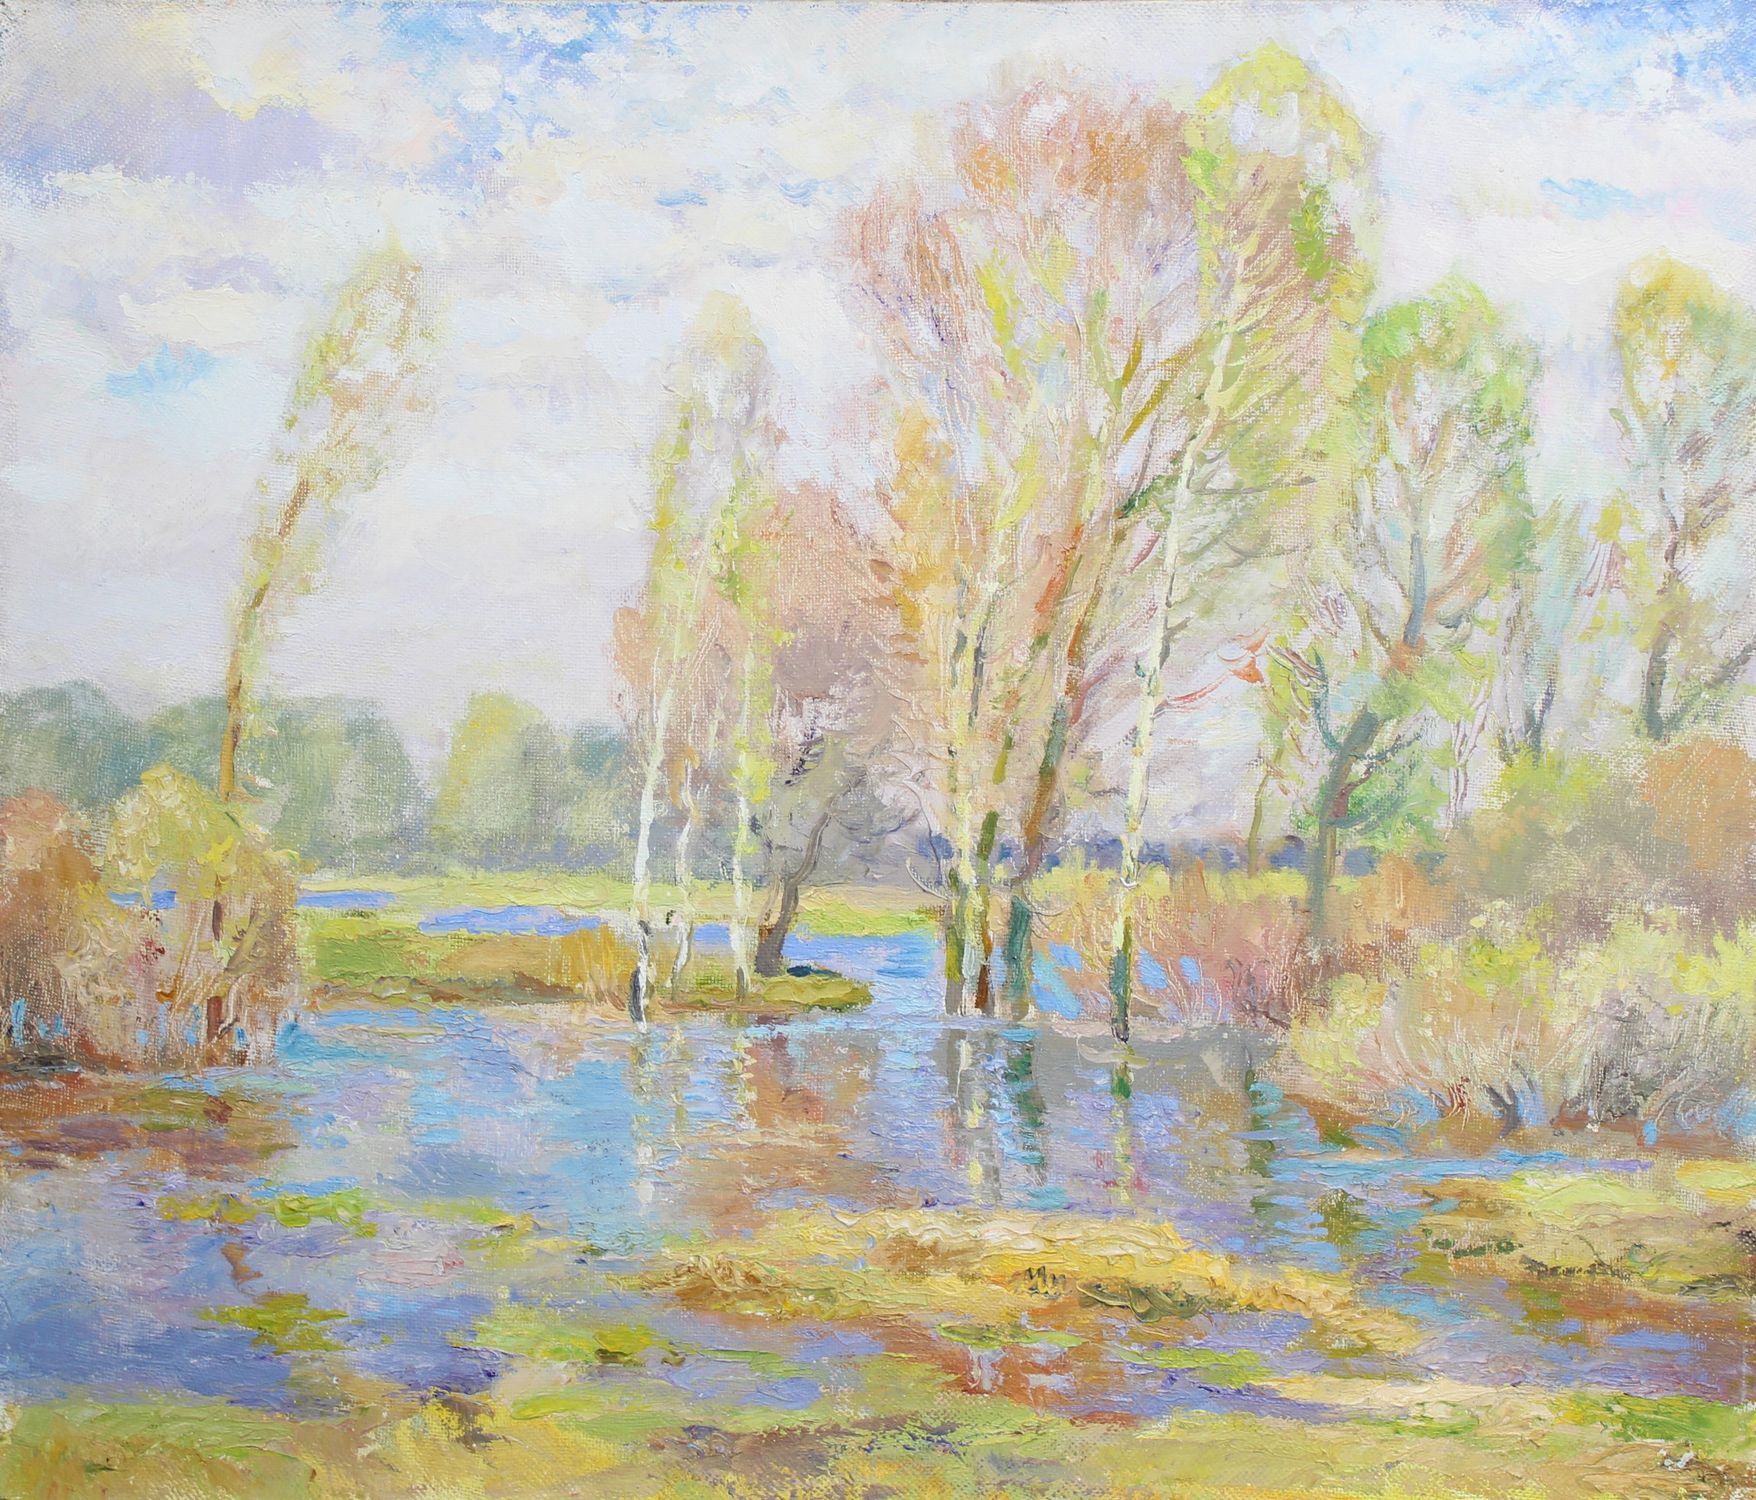 "Spring on the river"